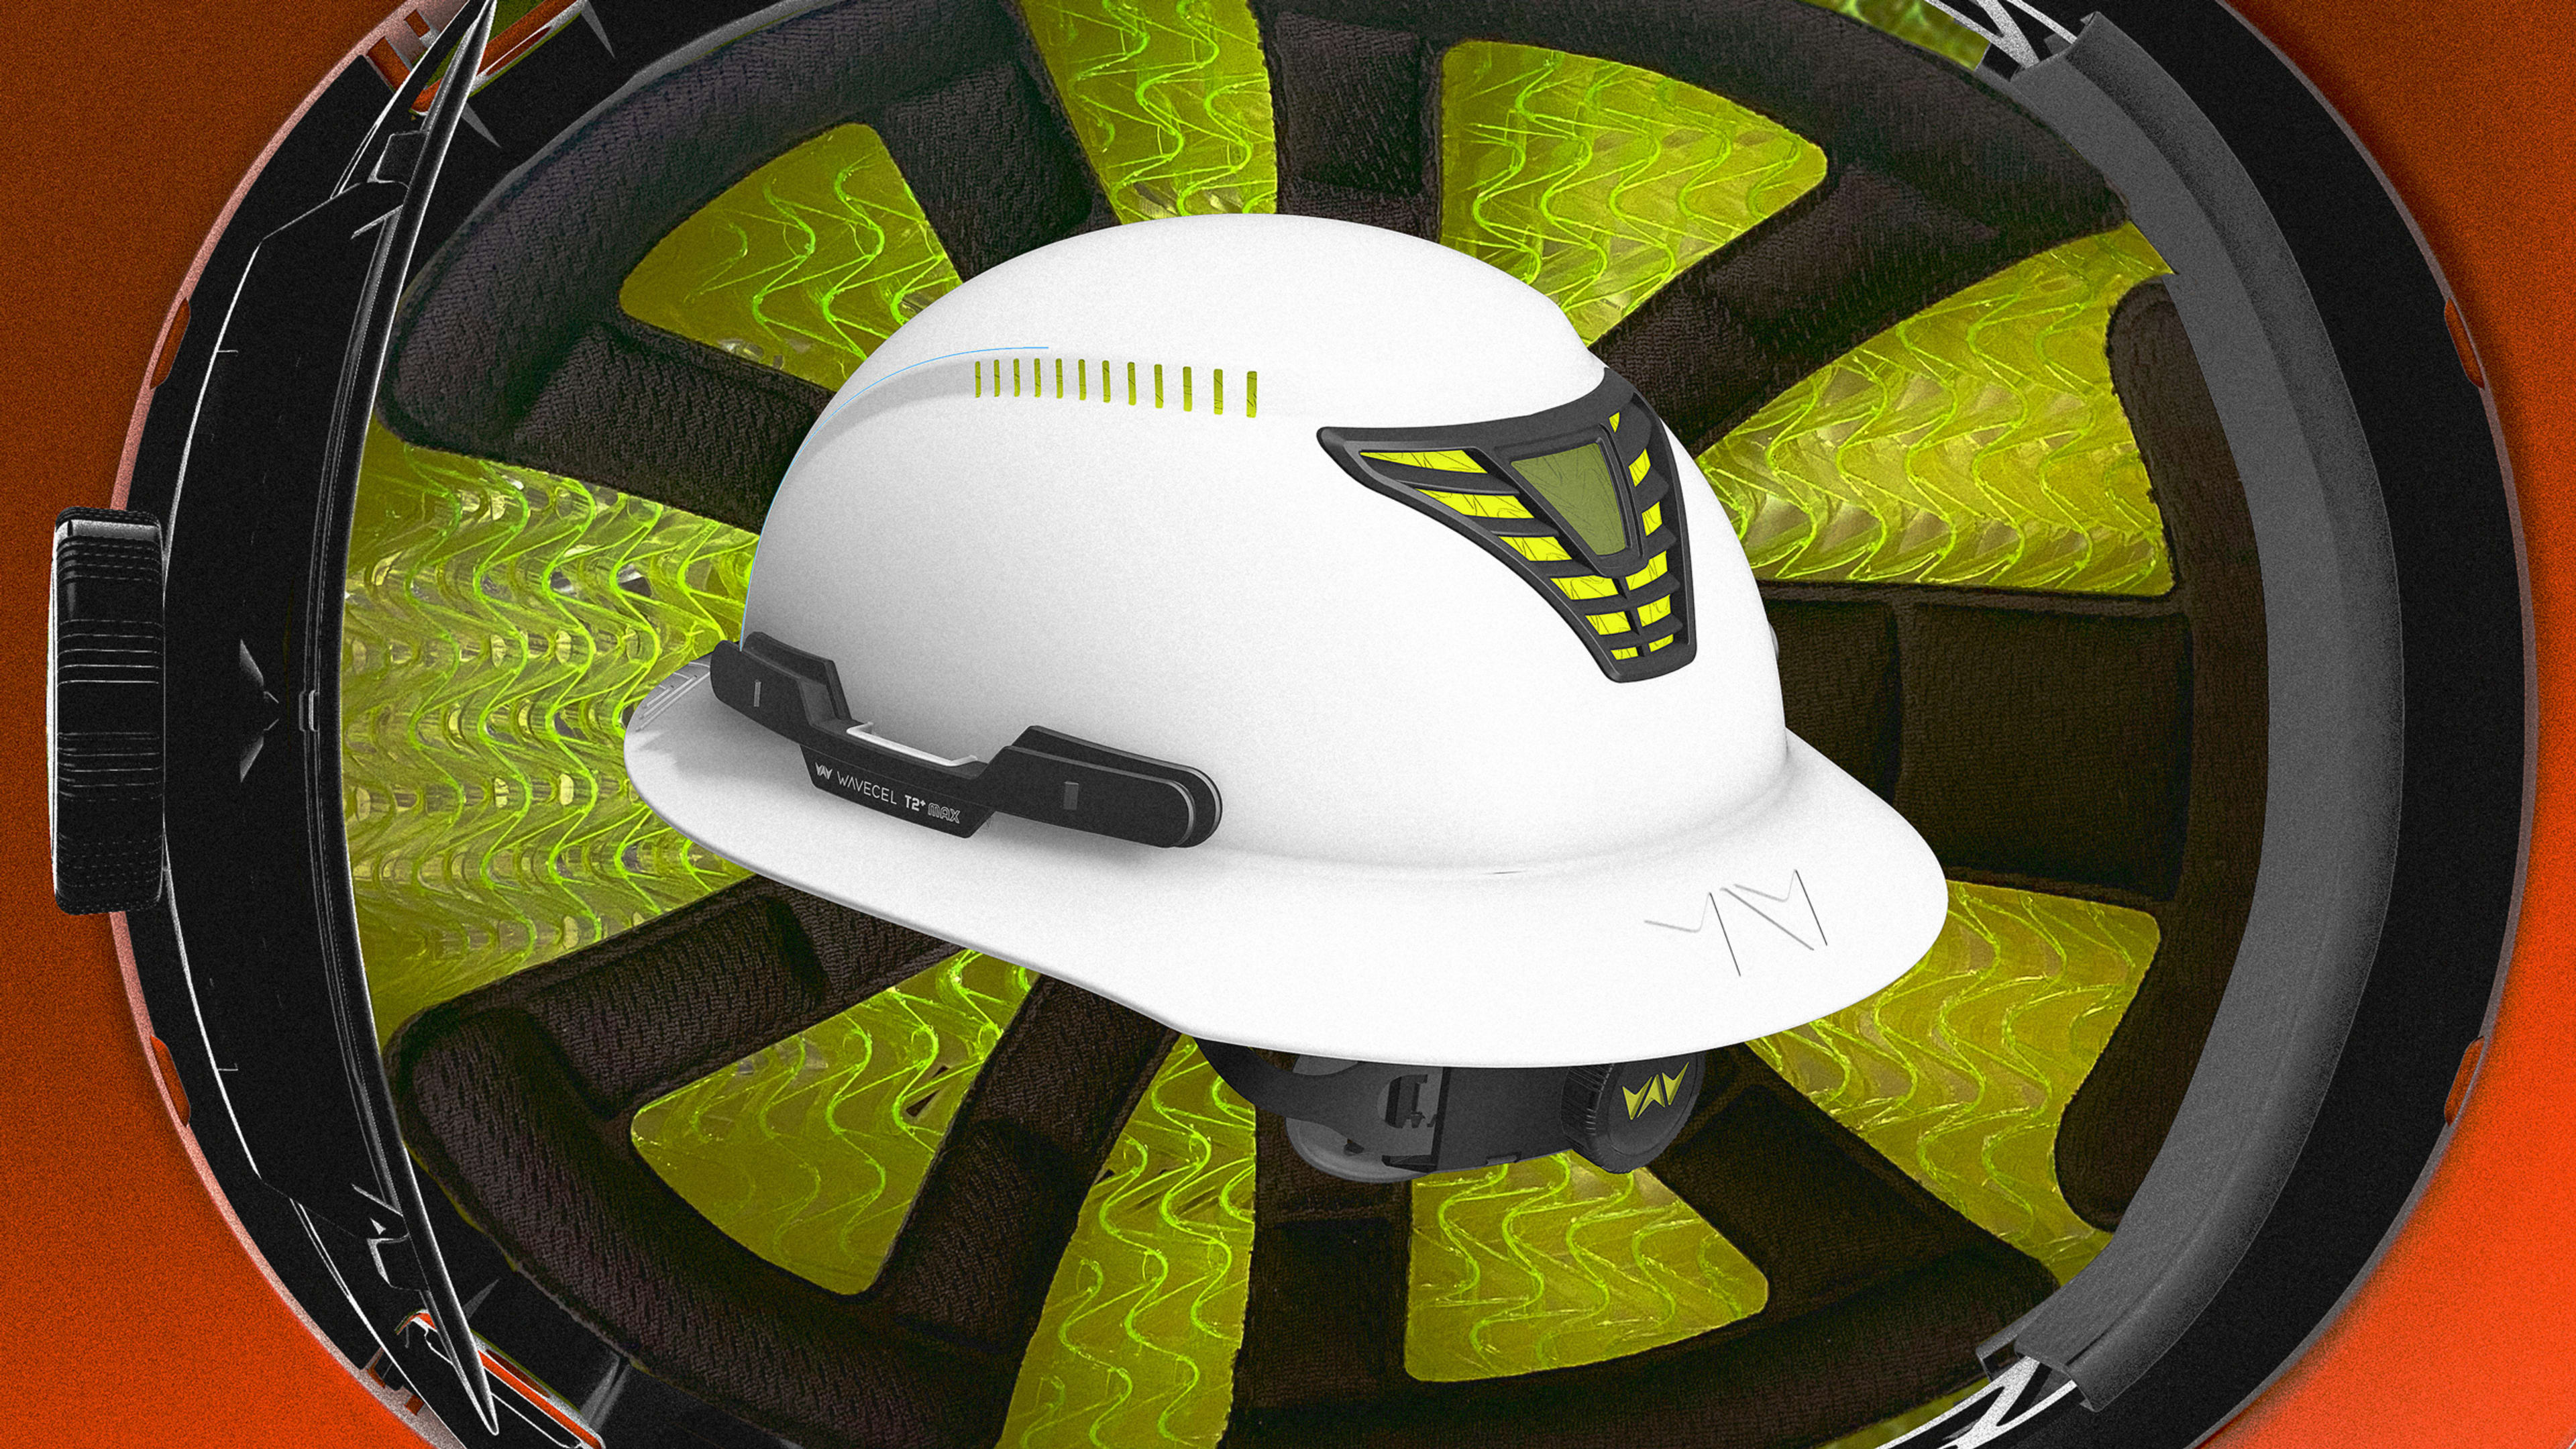 A new hard-hat material could reduce concussions by up to 98%